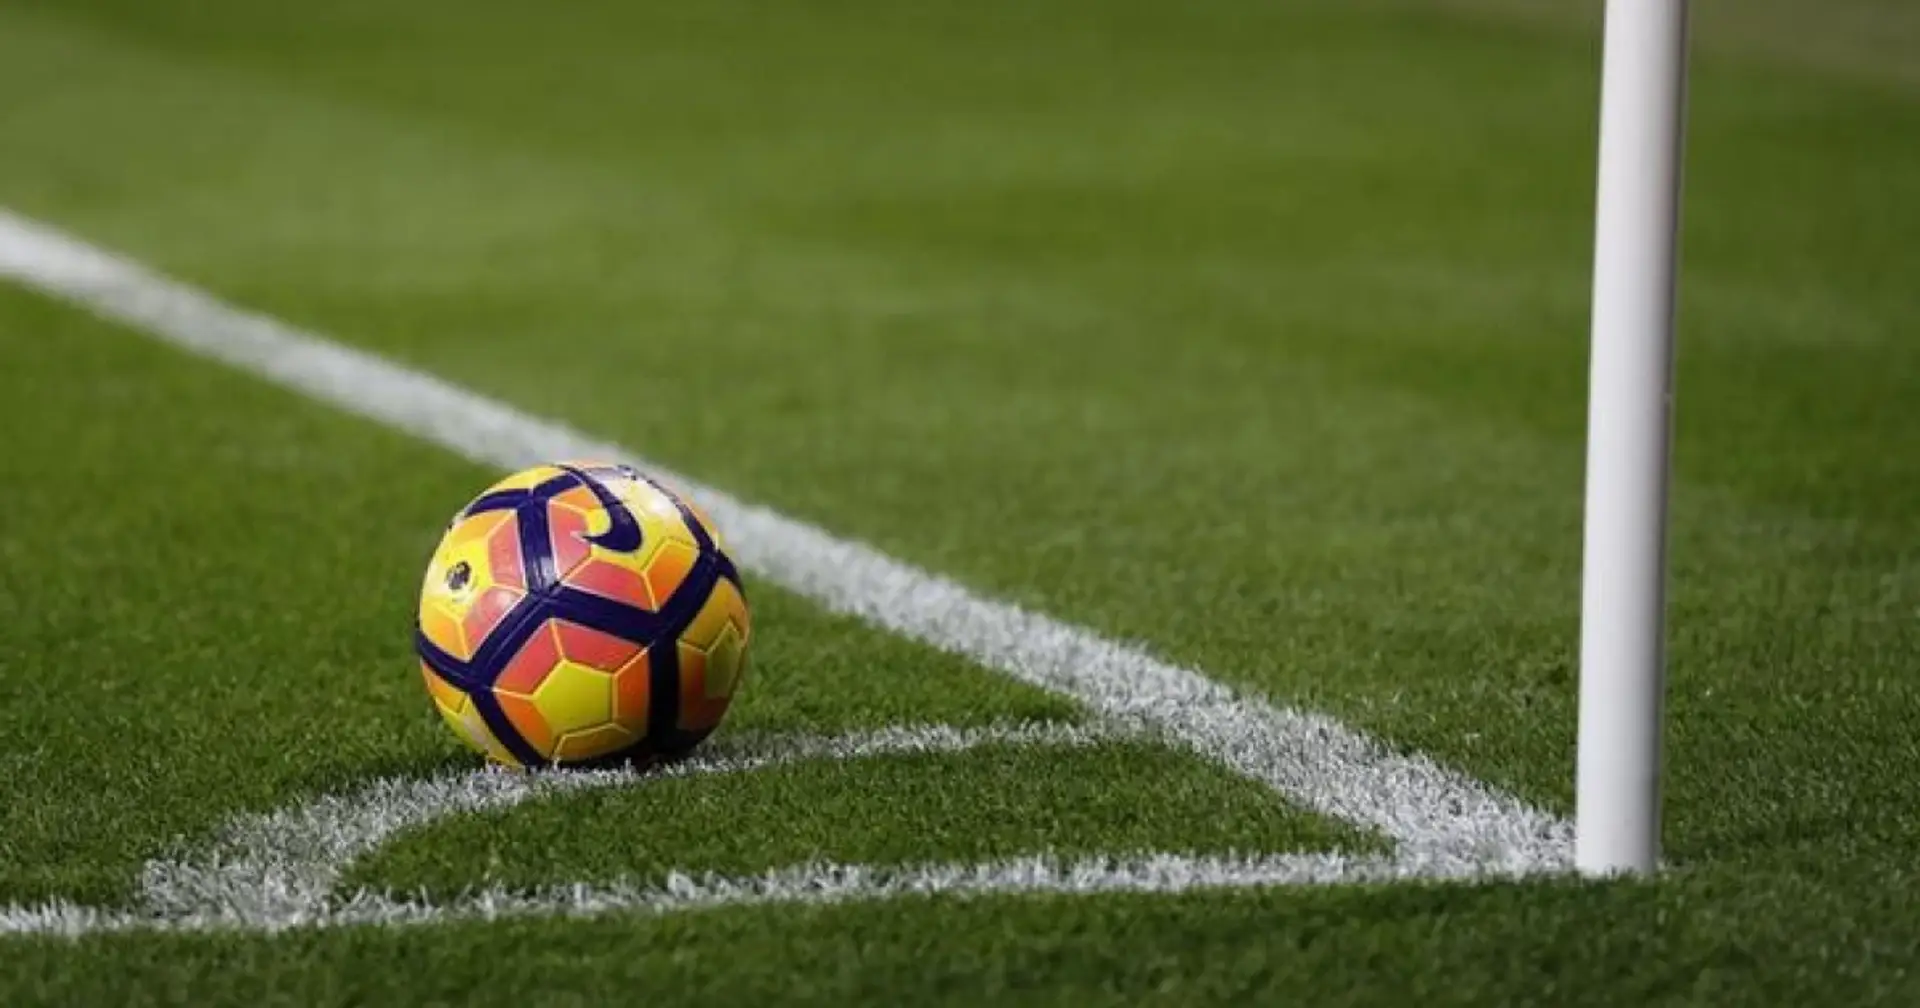 2 Premier League 'stars' arrested over alleged rape — they play for same club